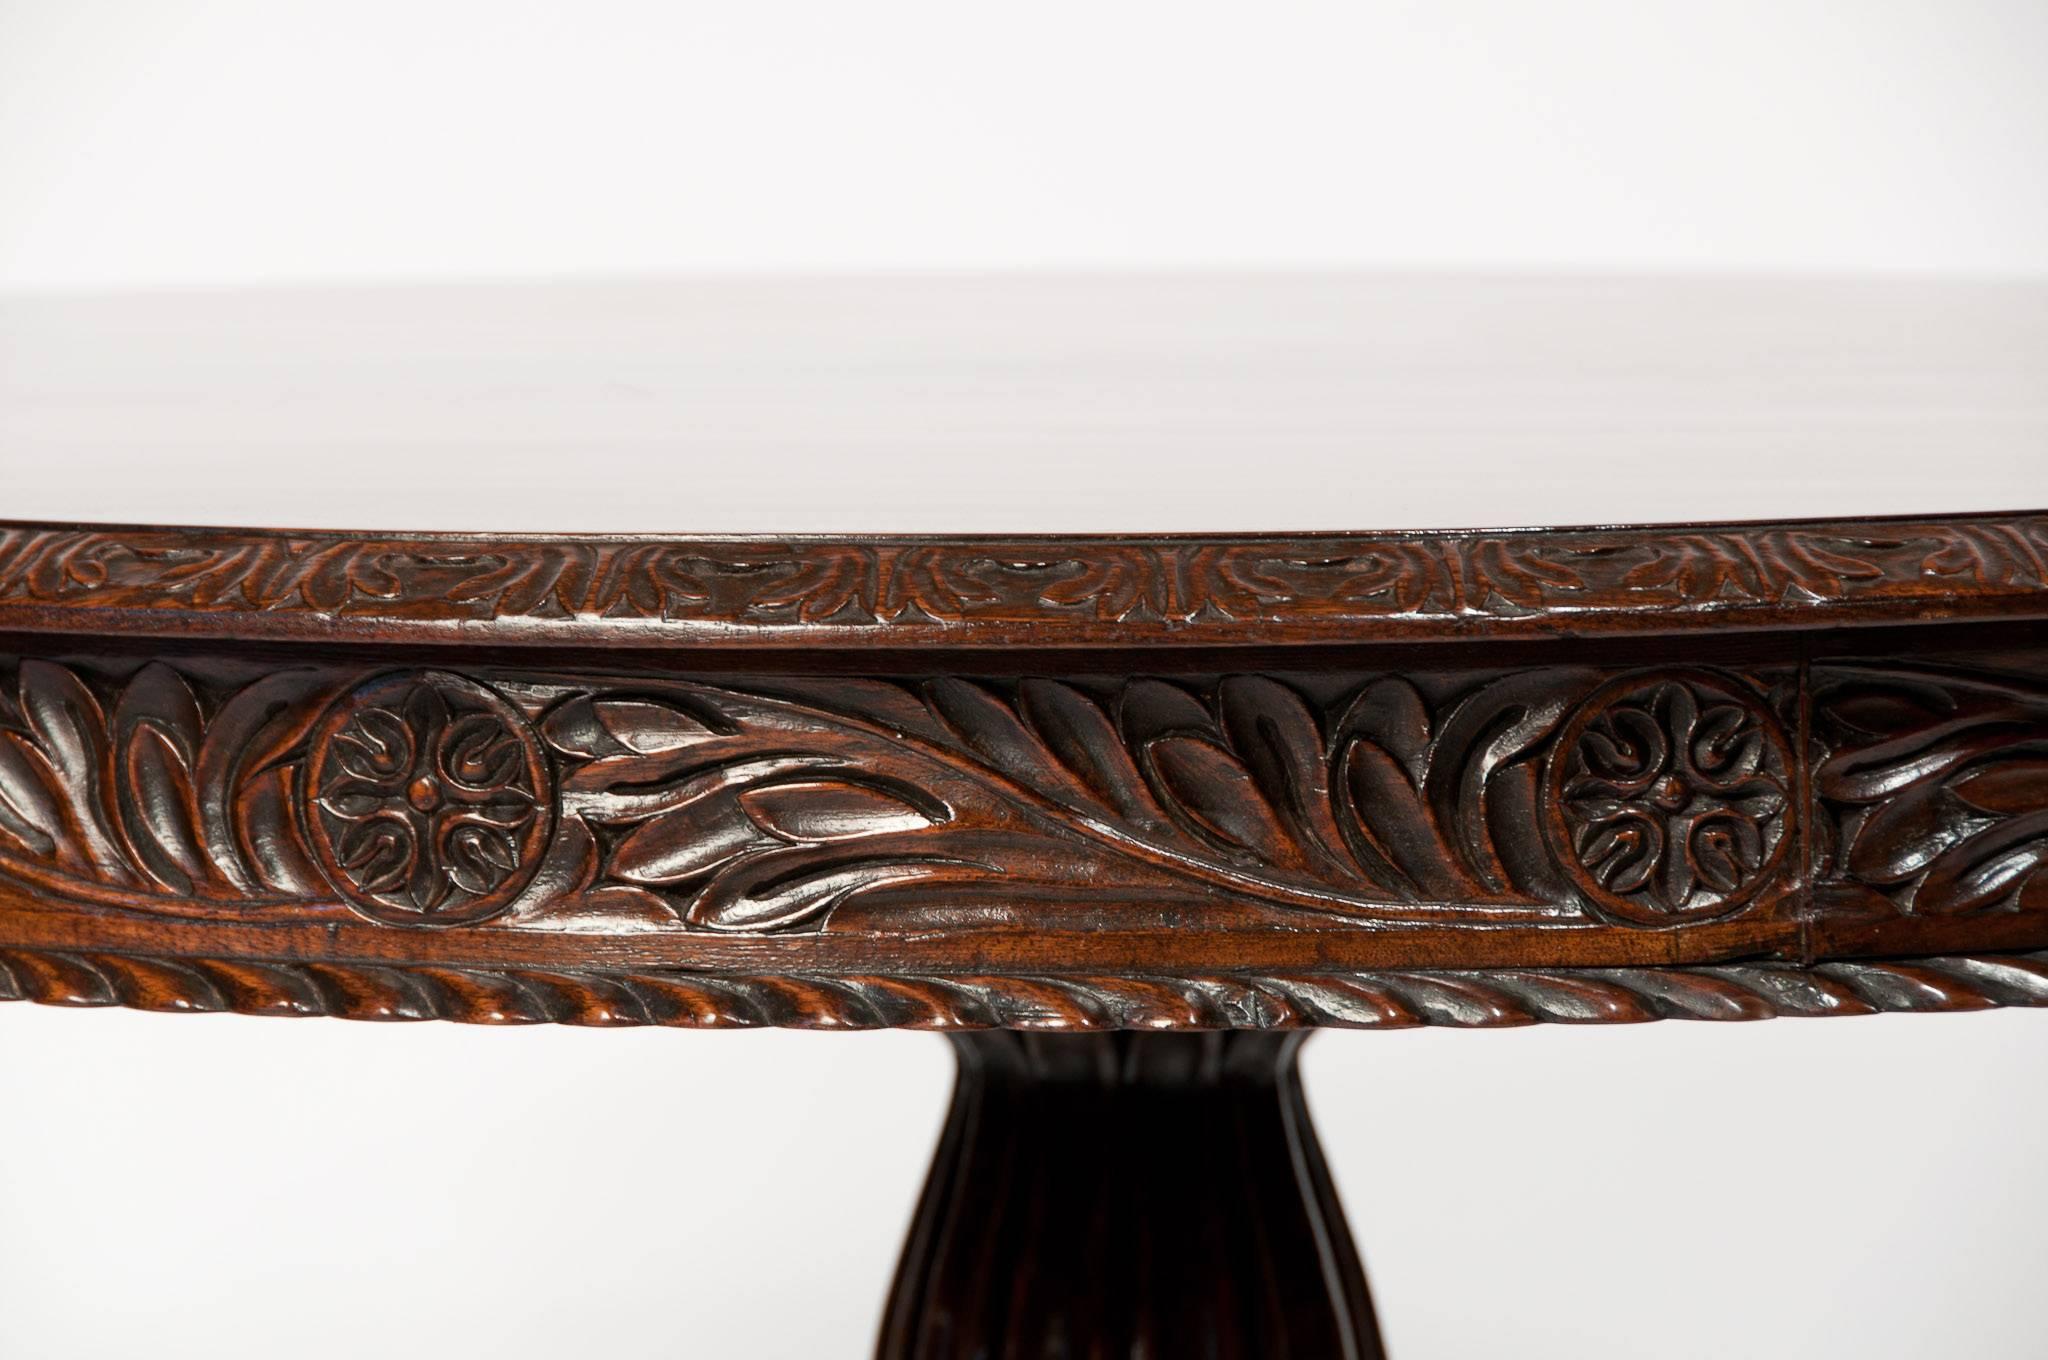 A very good quality early to mid-19th century Anglo-Indian rosewood (East Indian rosewood) carved table which can used as a breakfast or centre table. This very attractive table has a round tilt-top in solid rosewood with an intricately carved